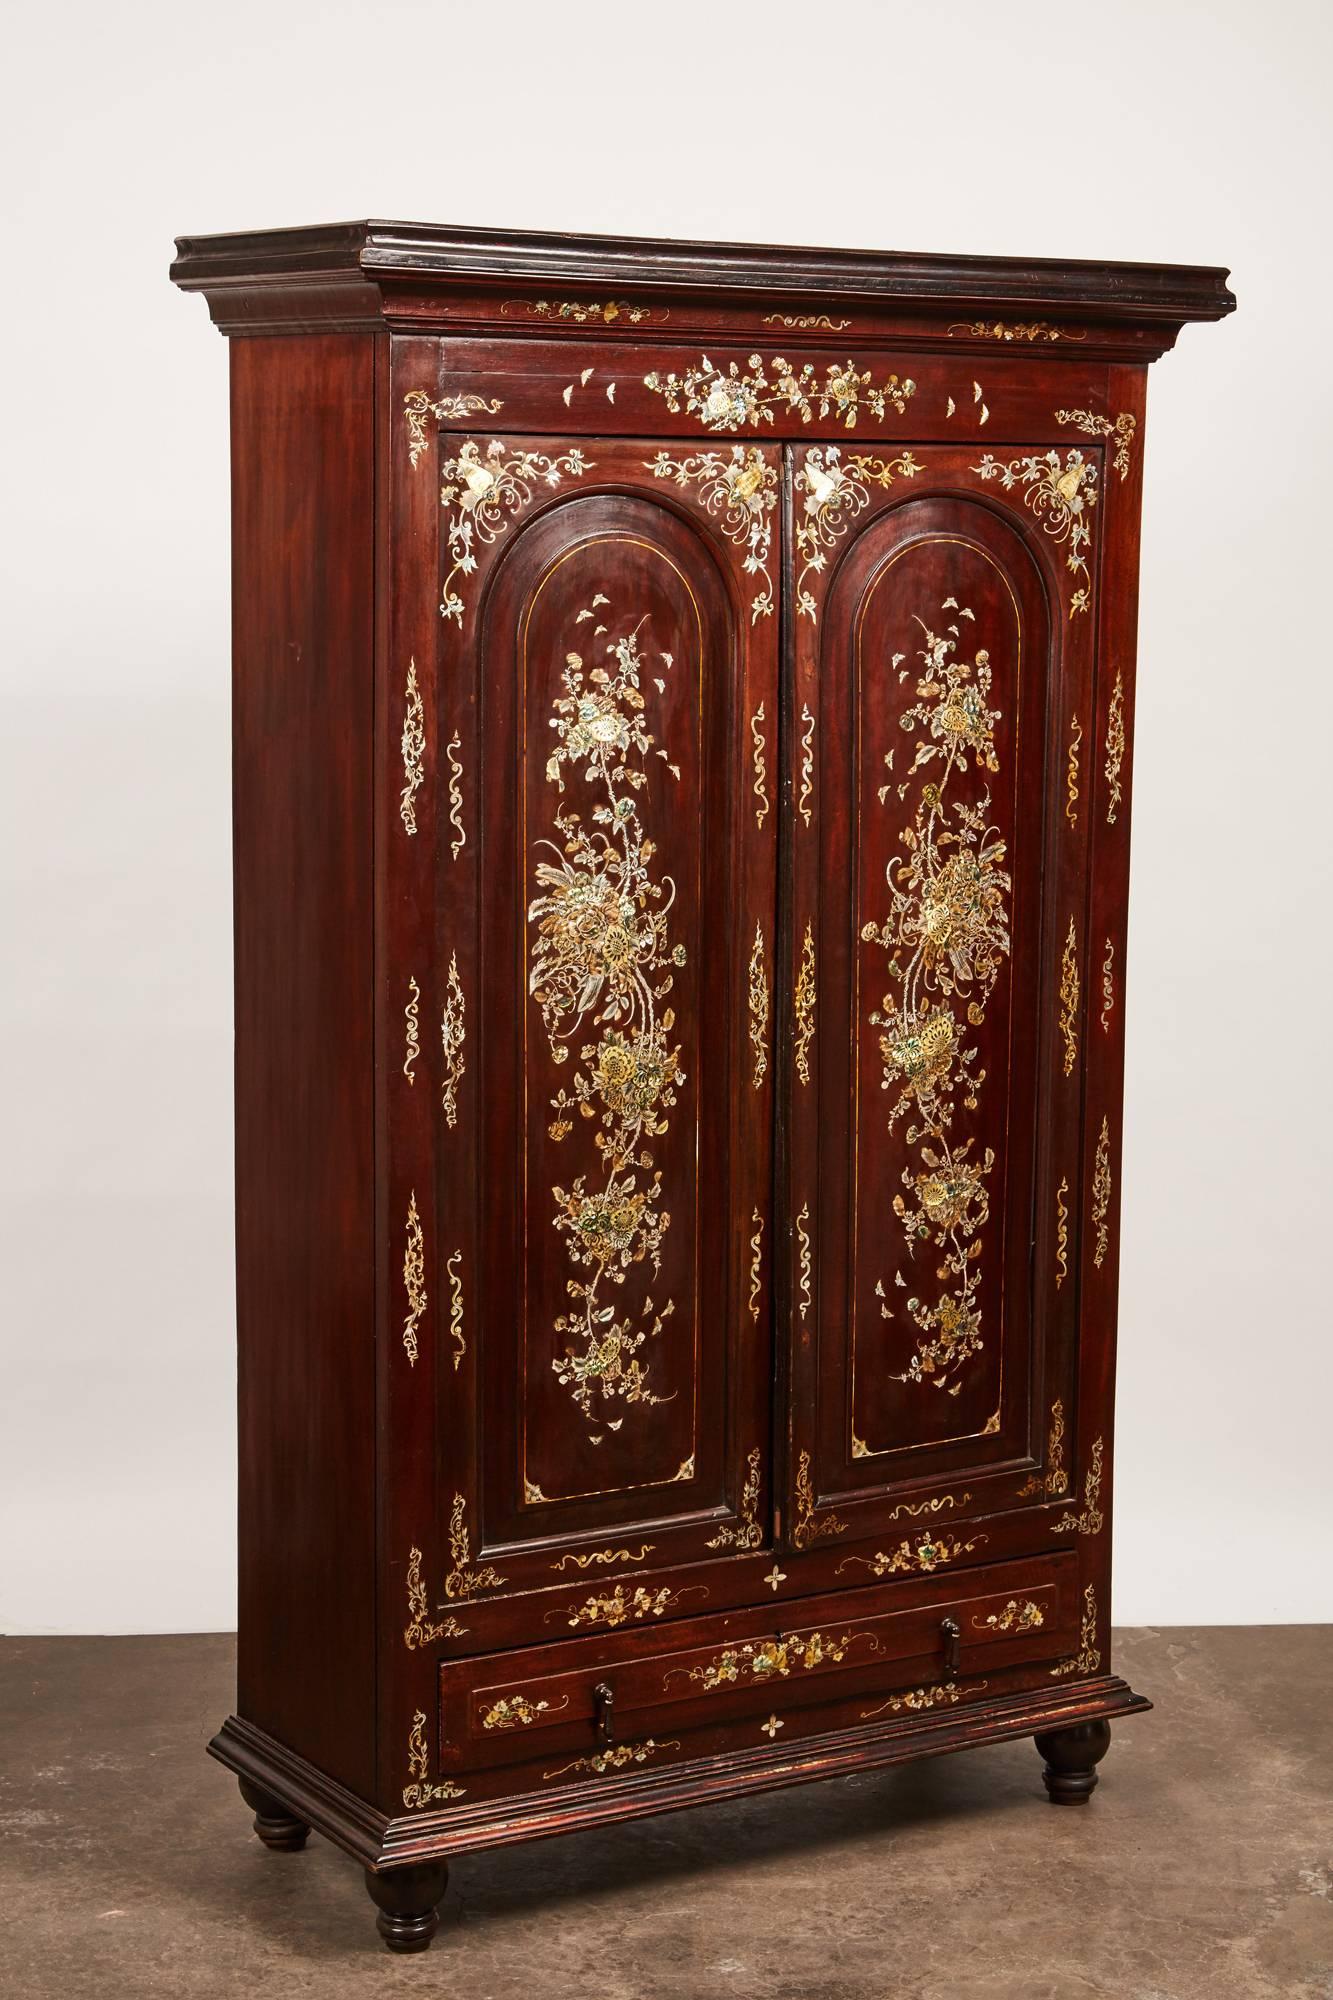 A 20th century French Colonial Vietnamese rosewood cabinet that features stunningly beautiful inlay of peonies and other foliage design in mother-of-pearl (M.O.P) across the facade of the cabinet.